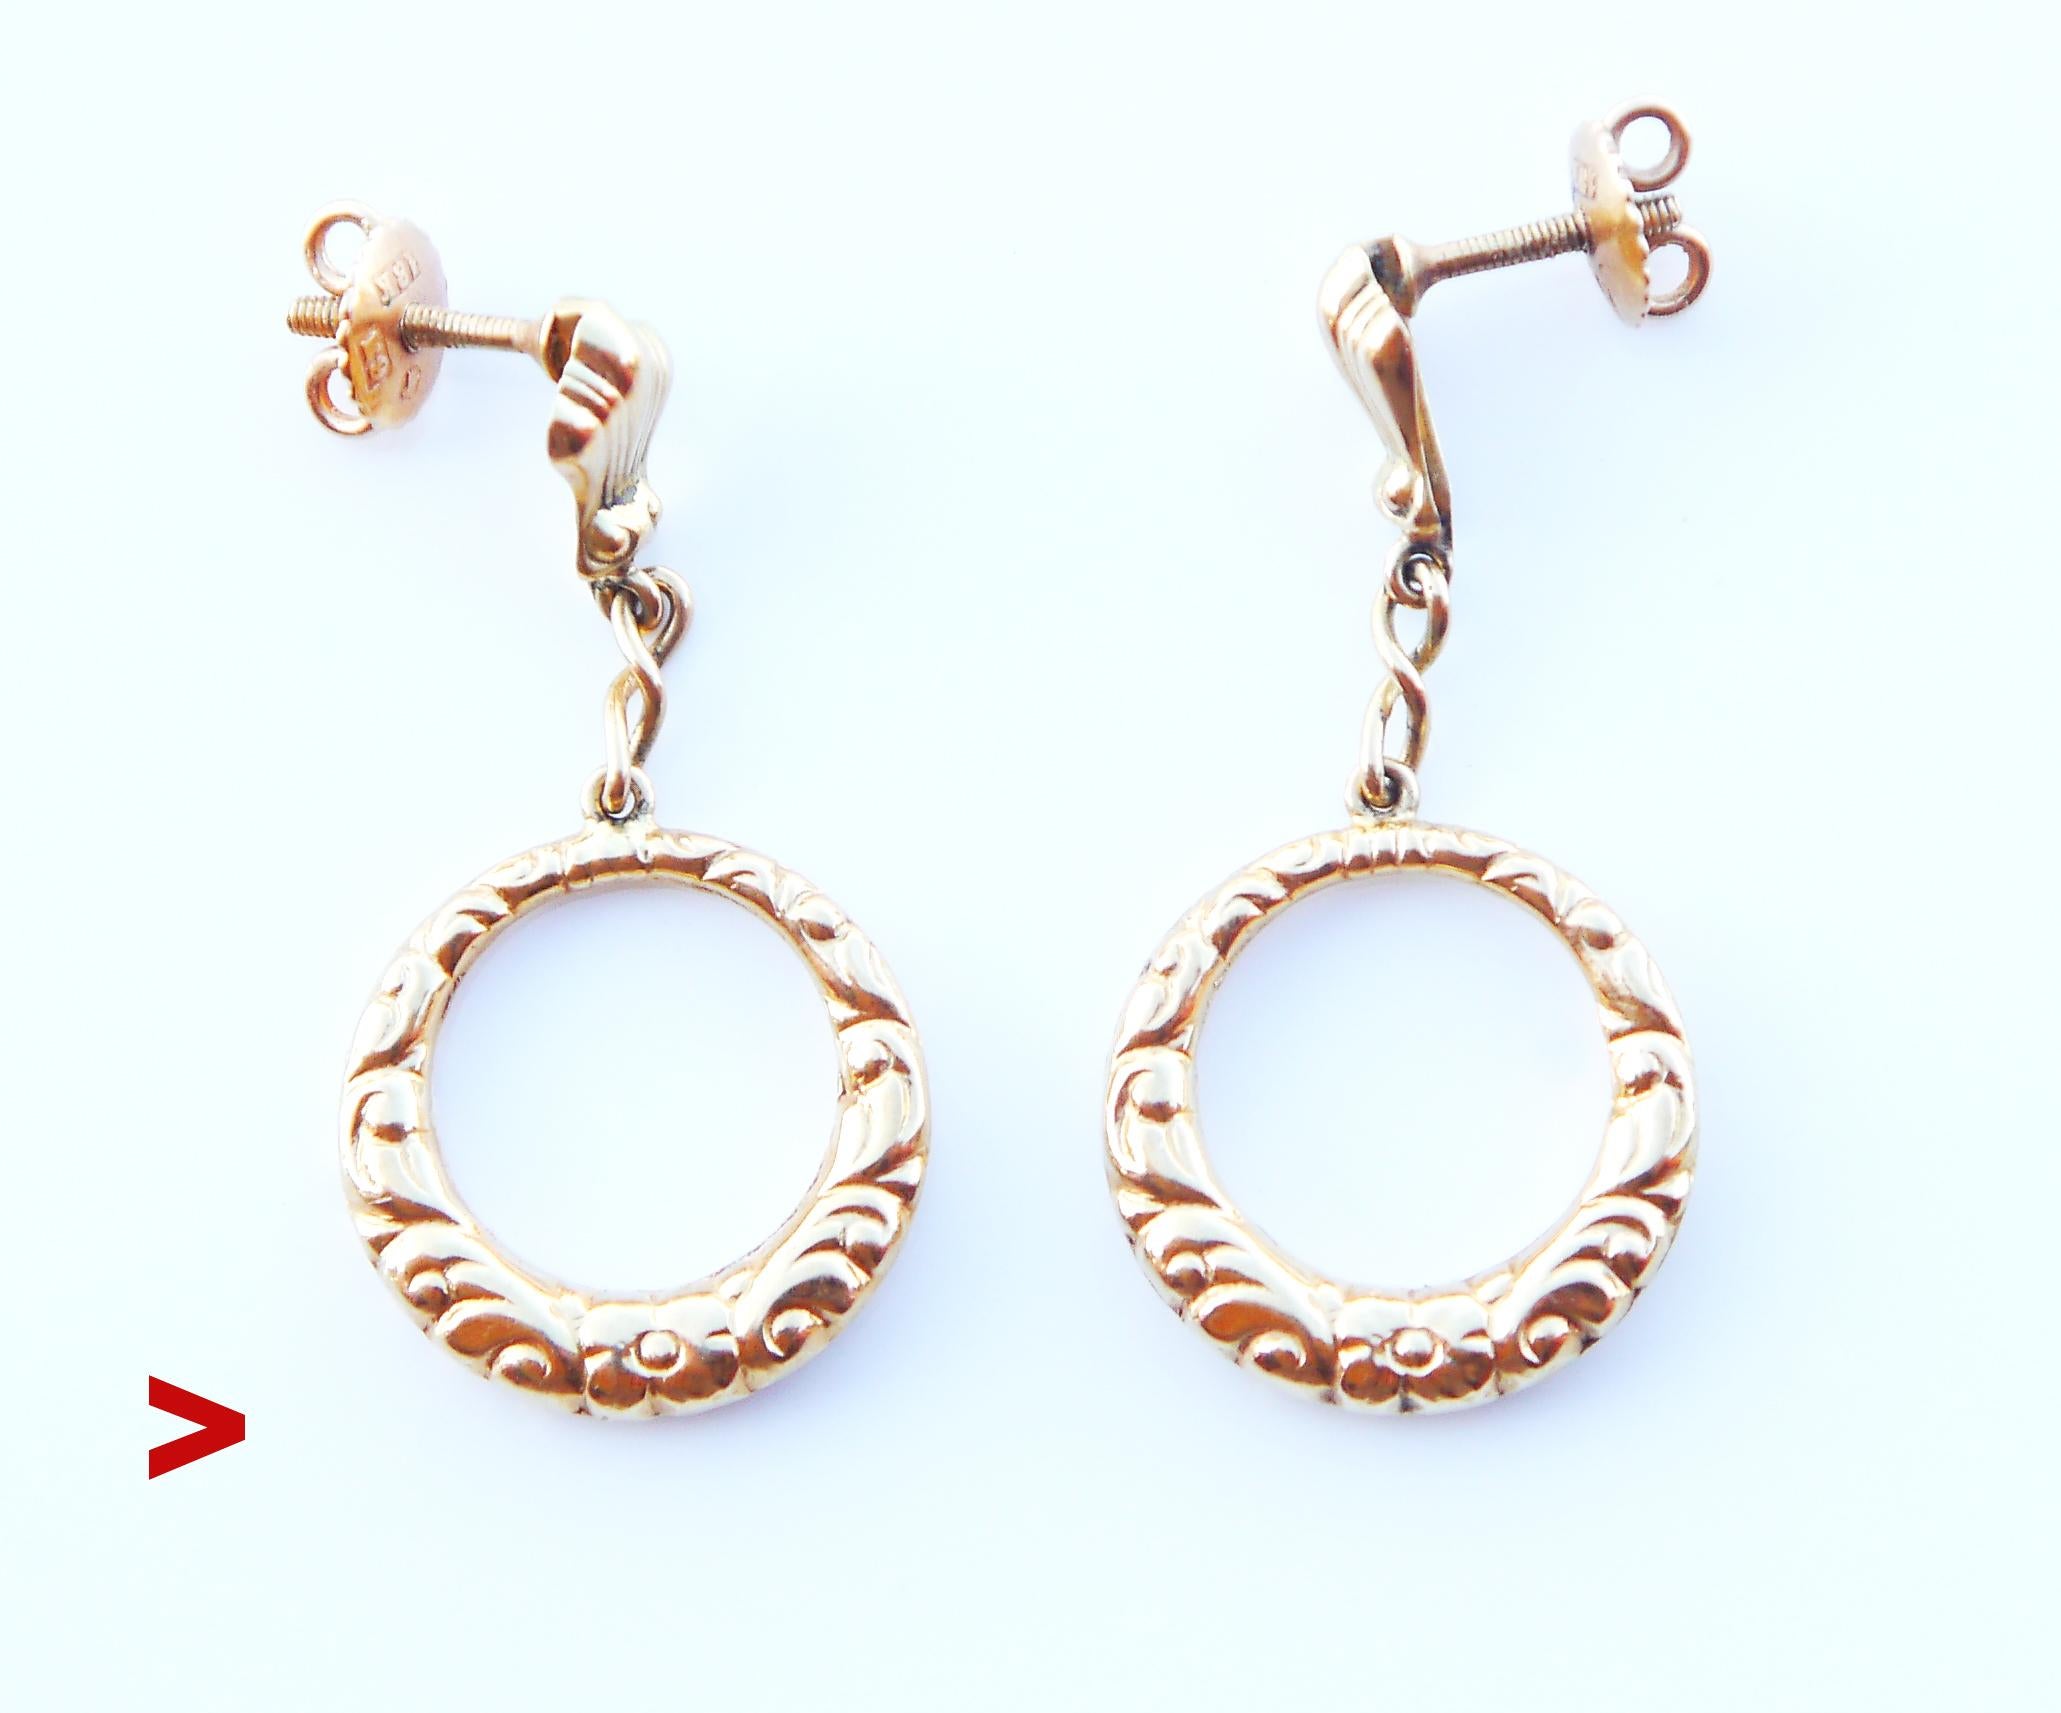 A pair of creole-shaped dangles in 18K Yellow Gold with cast floral ornaments on both sides chained to screwed hangers.
Rings look naturally voluminous being hollow inside. Both dangles are freely suspended and will mark any slightest movement of